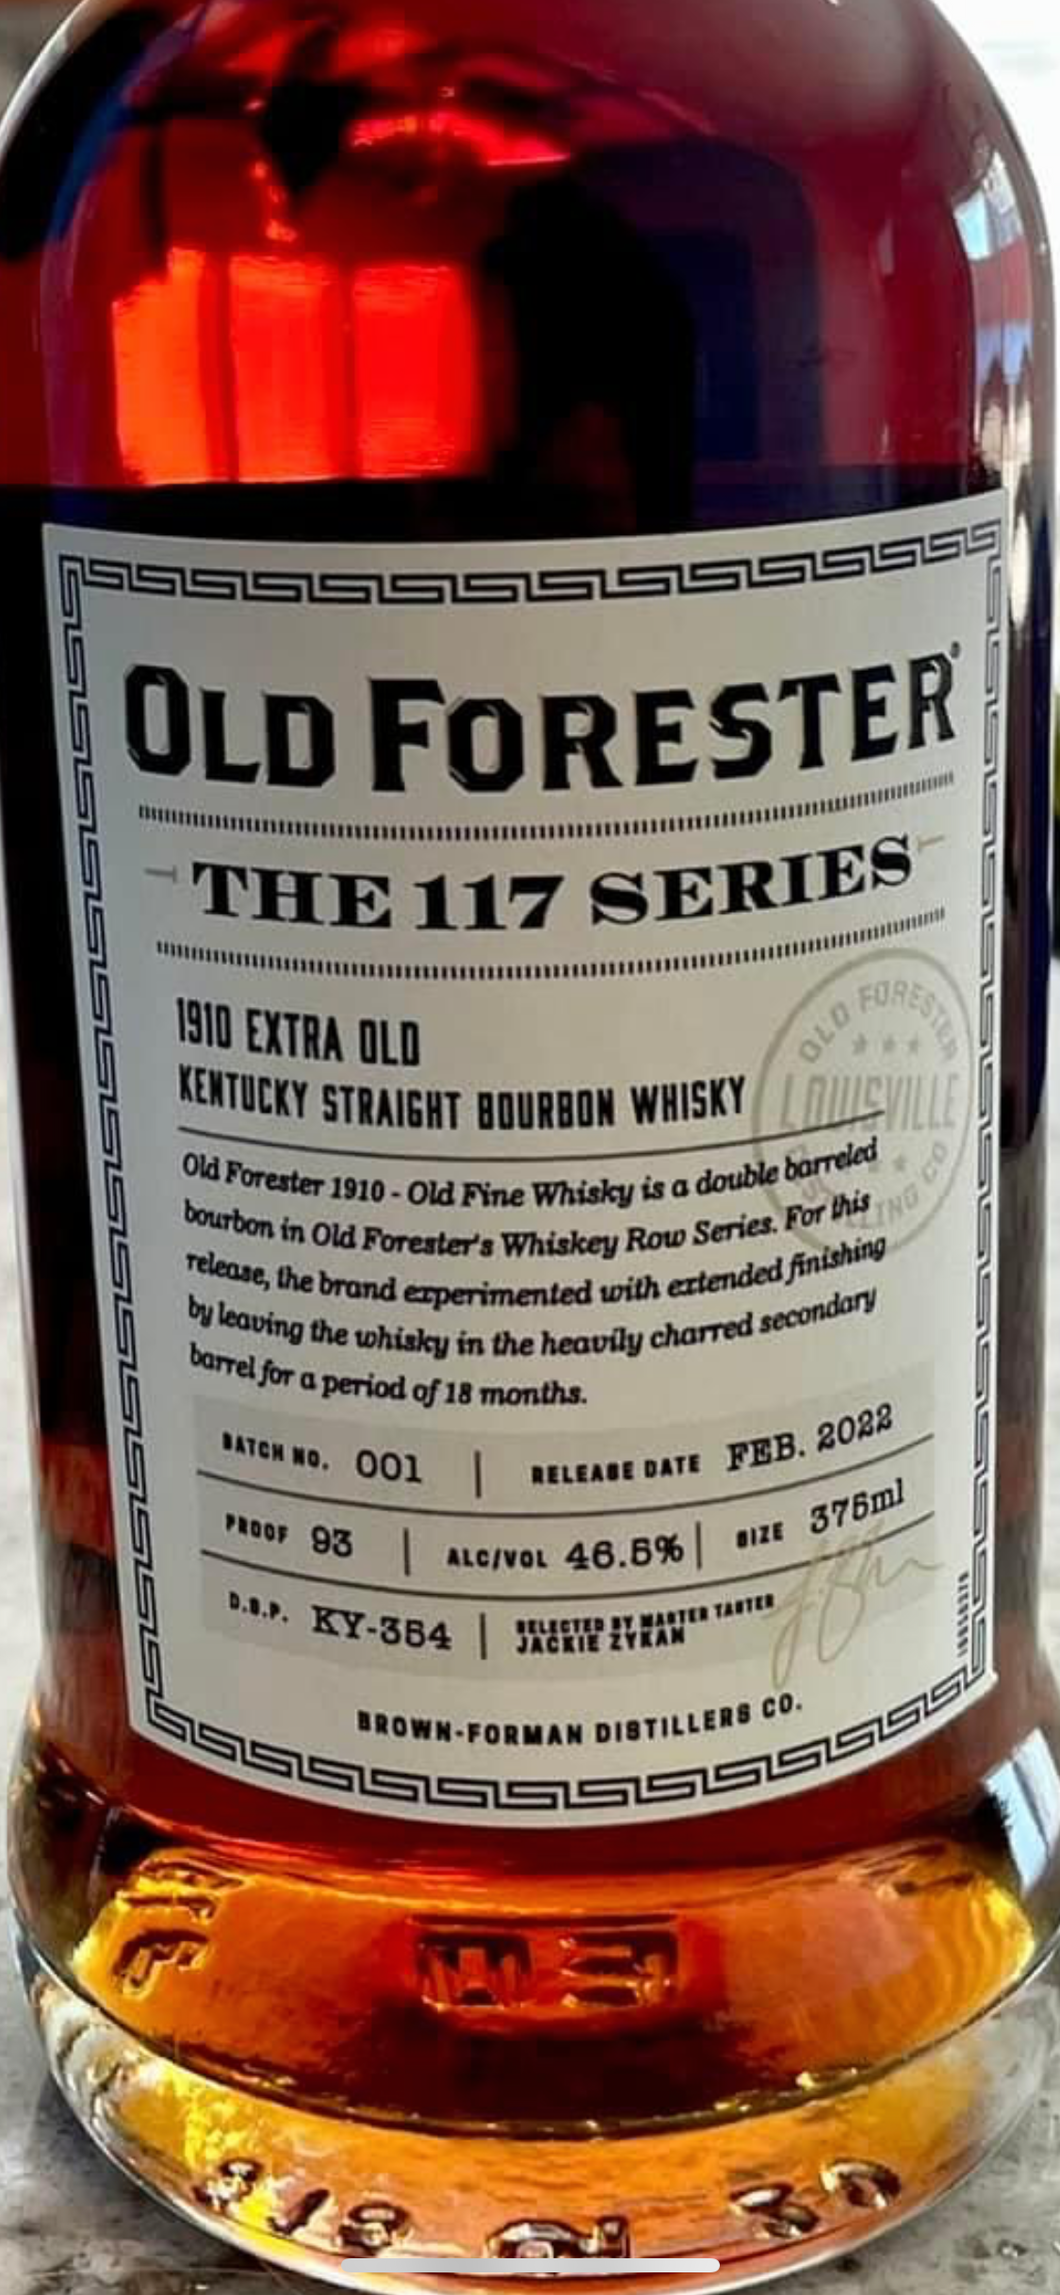 OLD FORESTER THE 117 SERIES 1910 EXTRA OLD